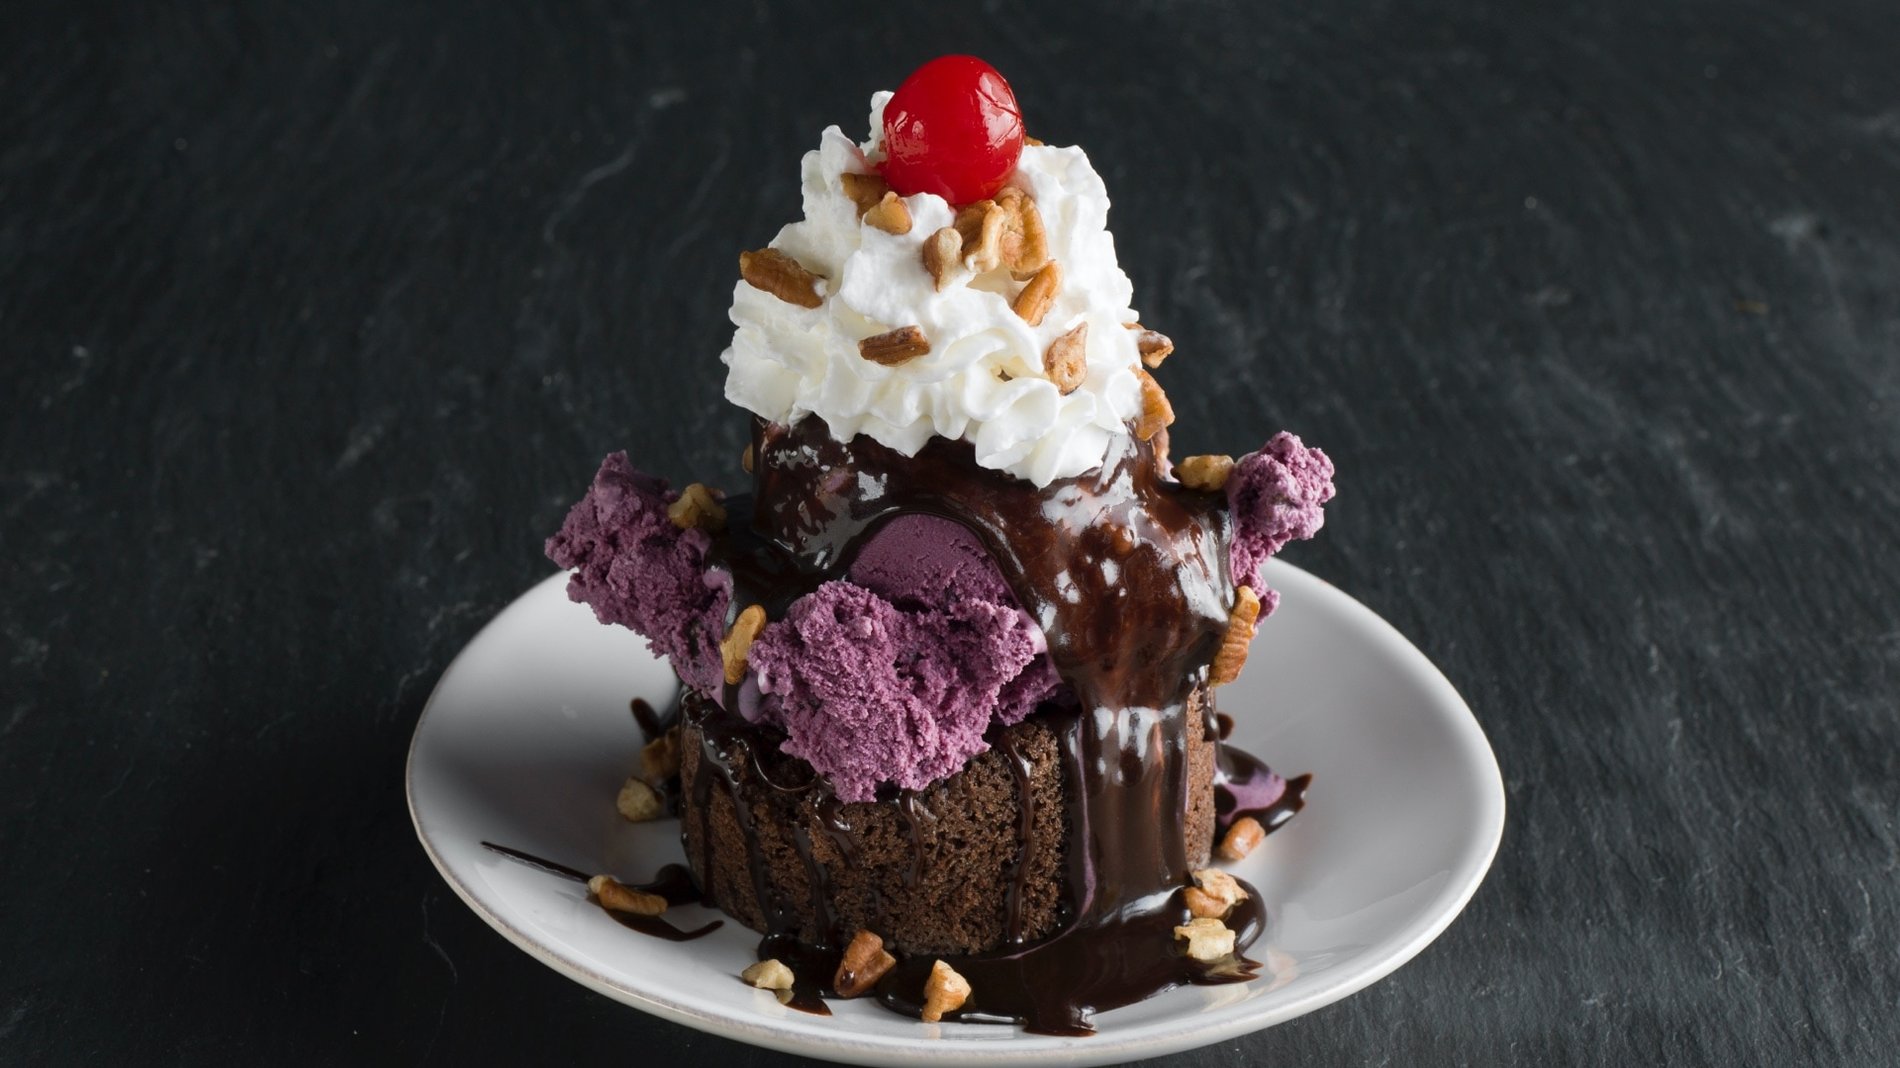 A Graeter's 1870 Tower Sundae, A fresh chocolate bundt cake filled with hot fudge, a scoop of black raspberry chocolate chip ice cream, drizzle with hot fudge, topped with fresh whipped cream, pecans and a cherry.